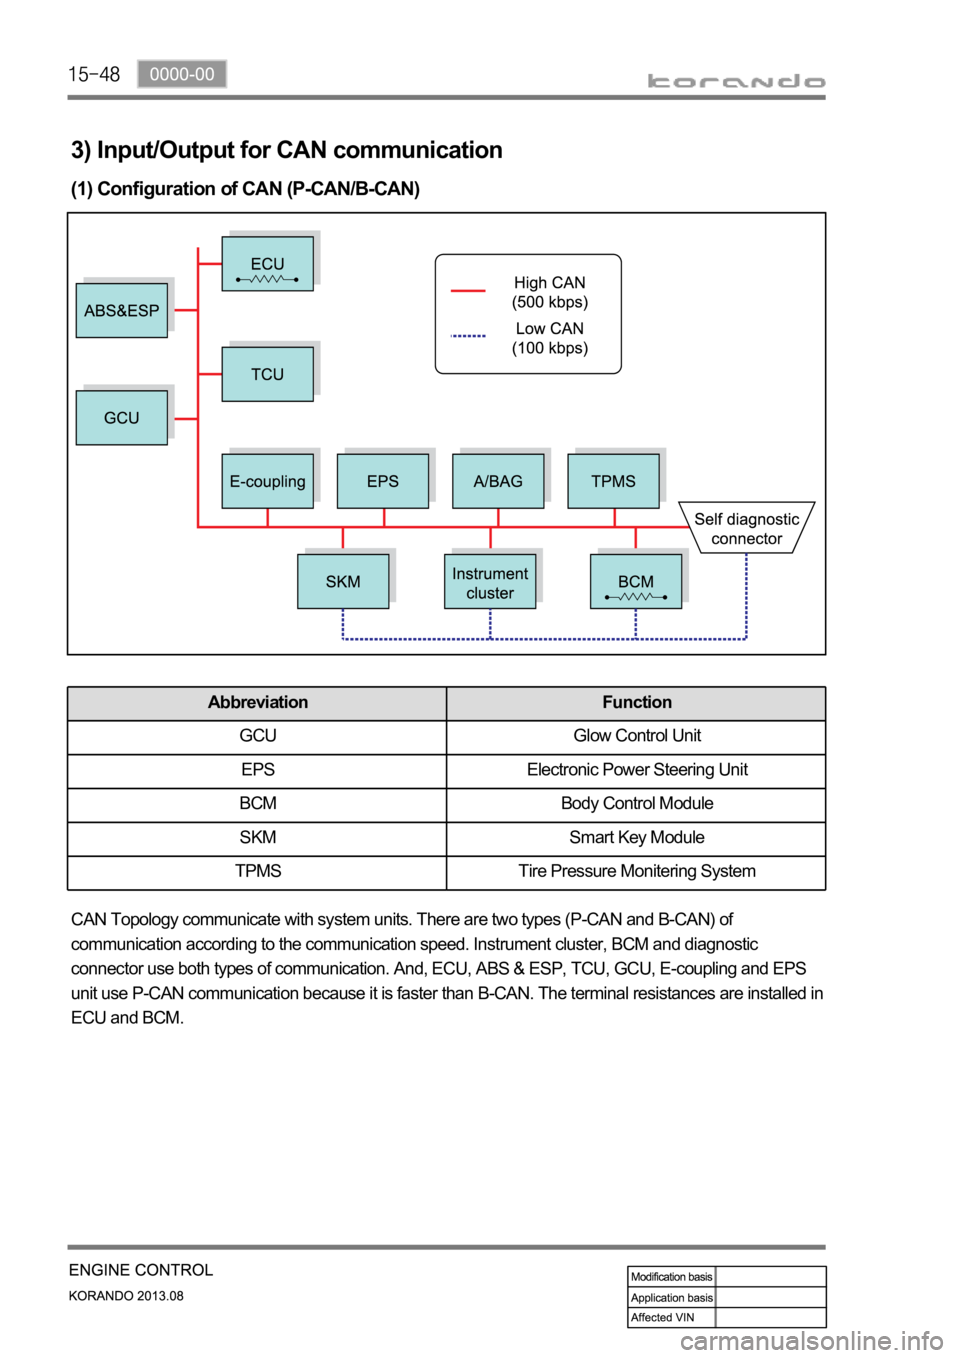 SSANGYONG KORANDO 2013  Service Manual 3) Input/Output for CAN communication
(1) Configuration of CAN (P-CAN/B-CAN)
CAN Topology communicate with system units. There are two types (P-CAN and B-CAN) of 
communication according to the commun